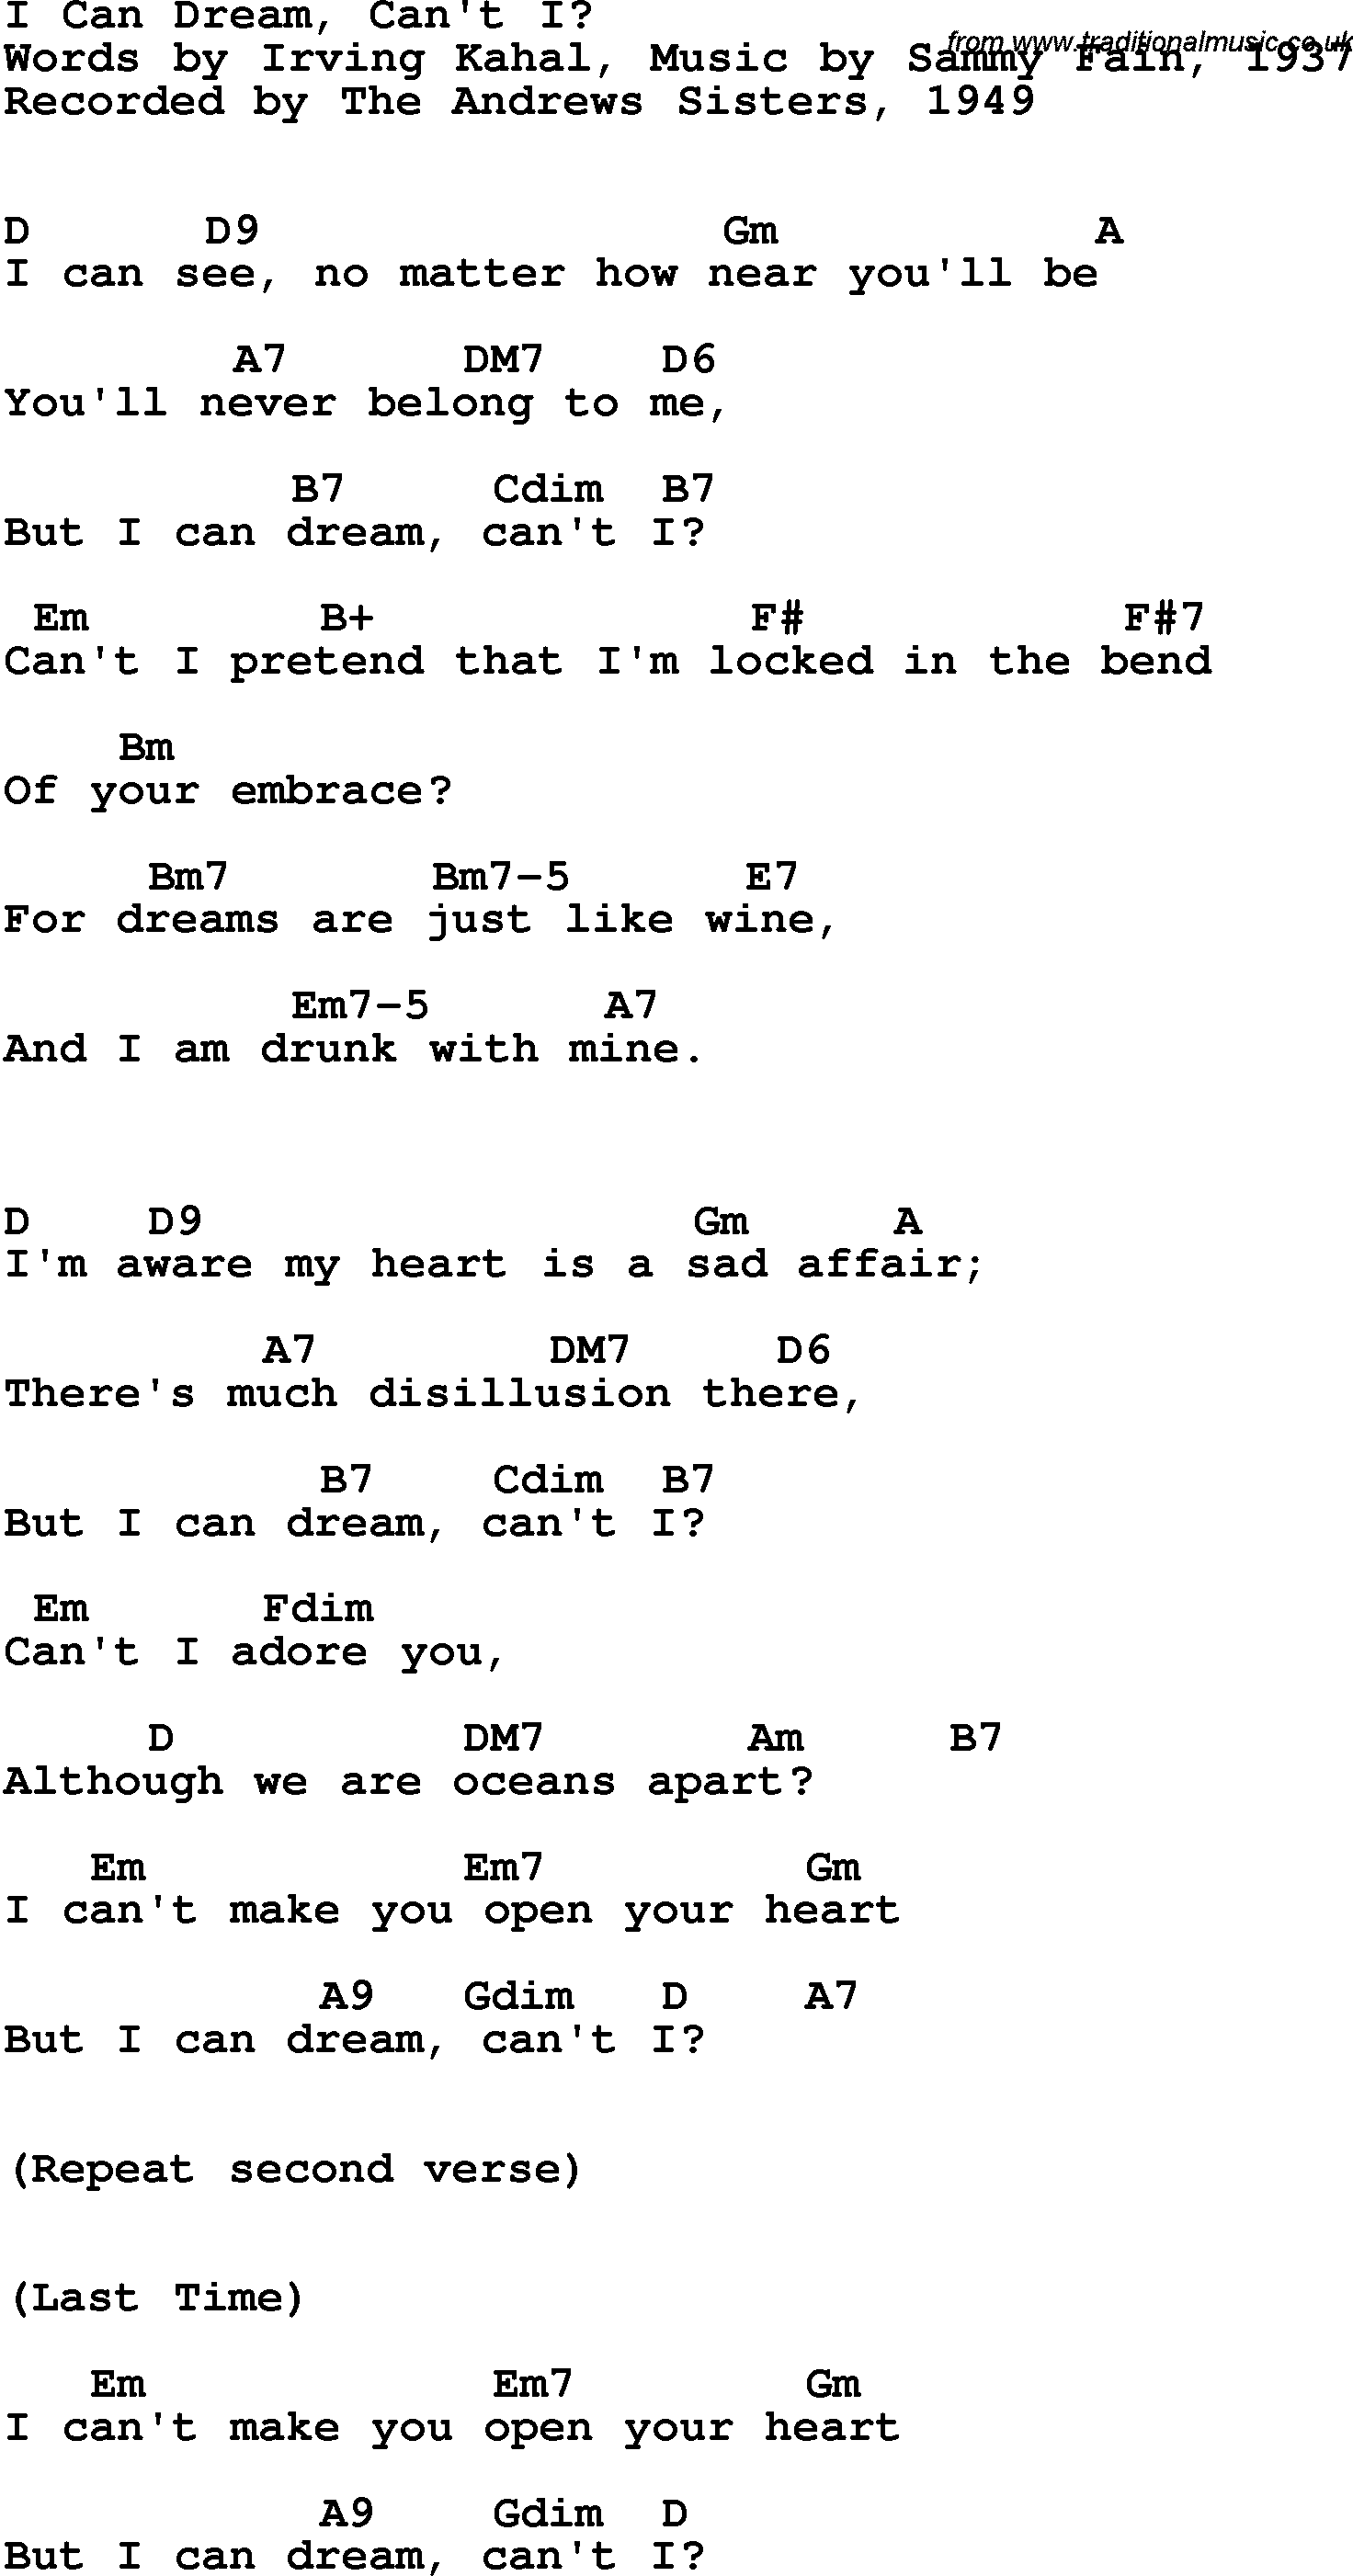 Song Lyrics with guitar chords for I Can Dream, Can't I - The Andrews Sisters, 1949